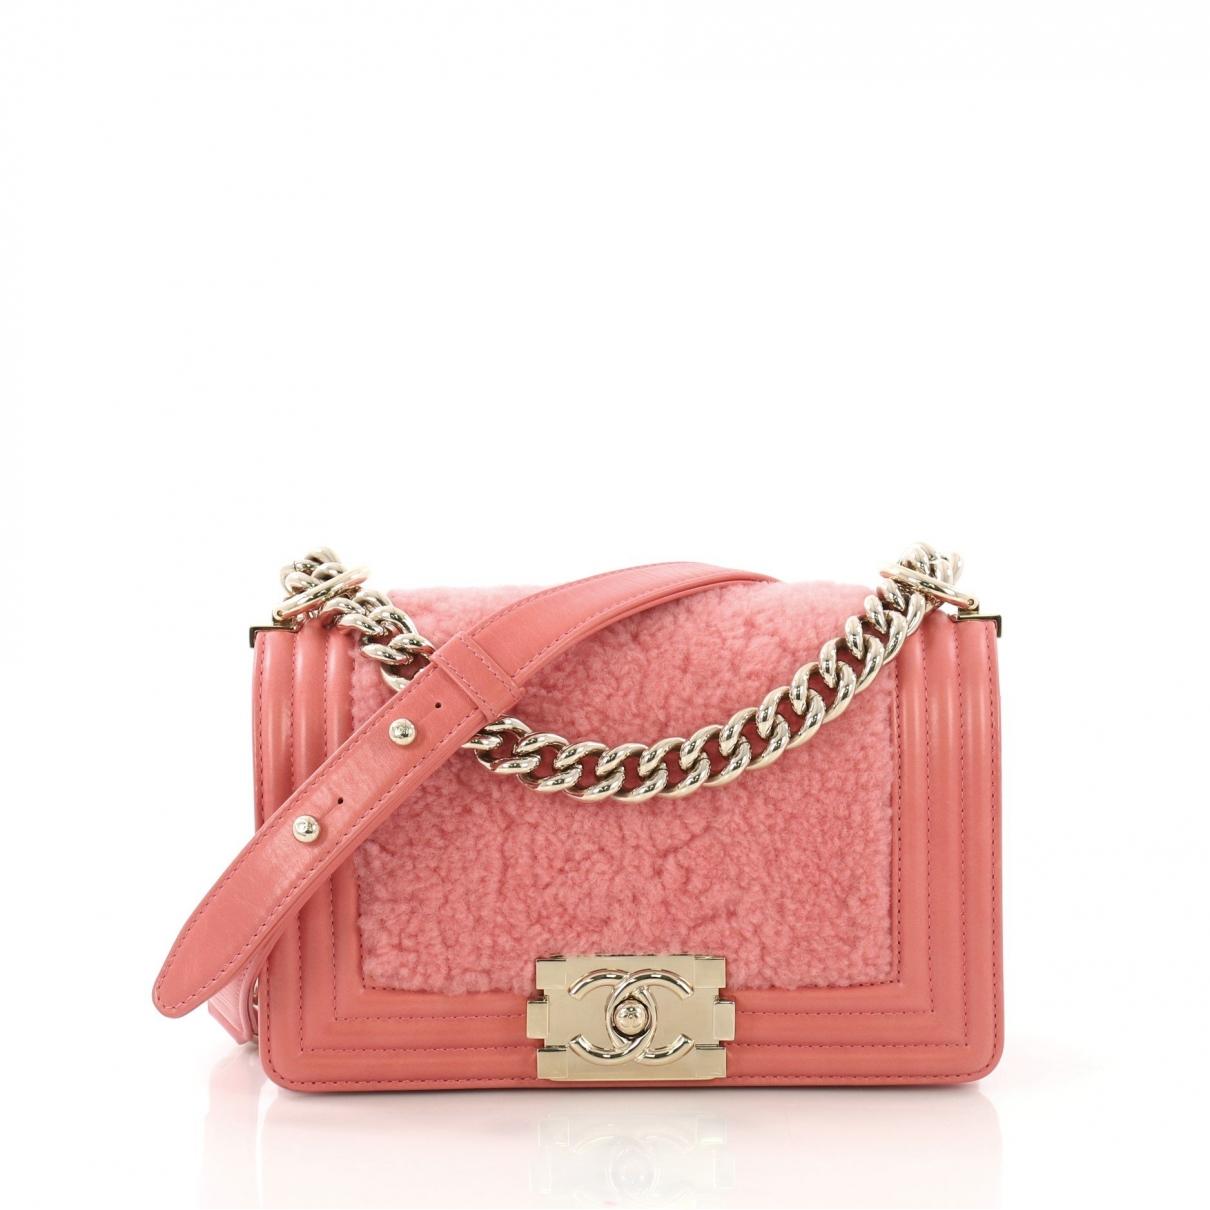 Lyst - Chanel Pre-owned Boy Pink Leather Handbags in Pink